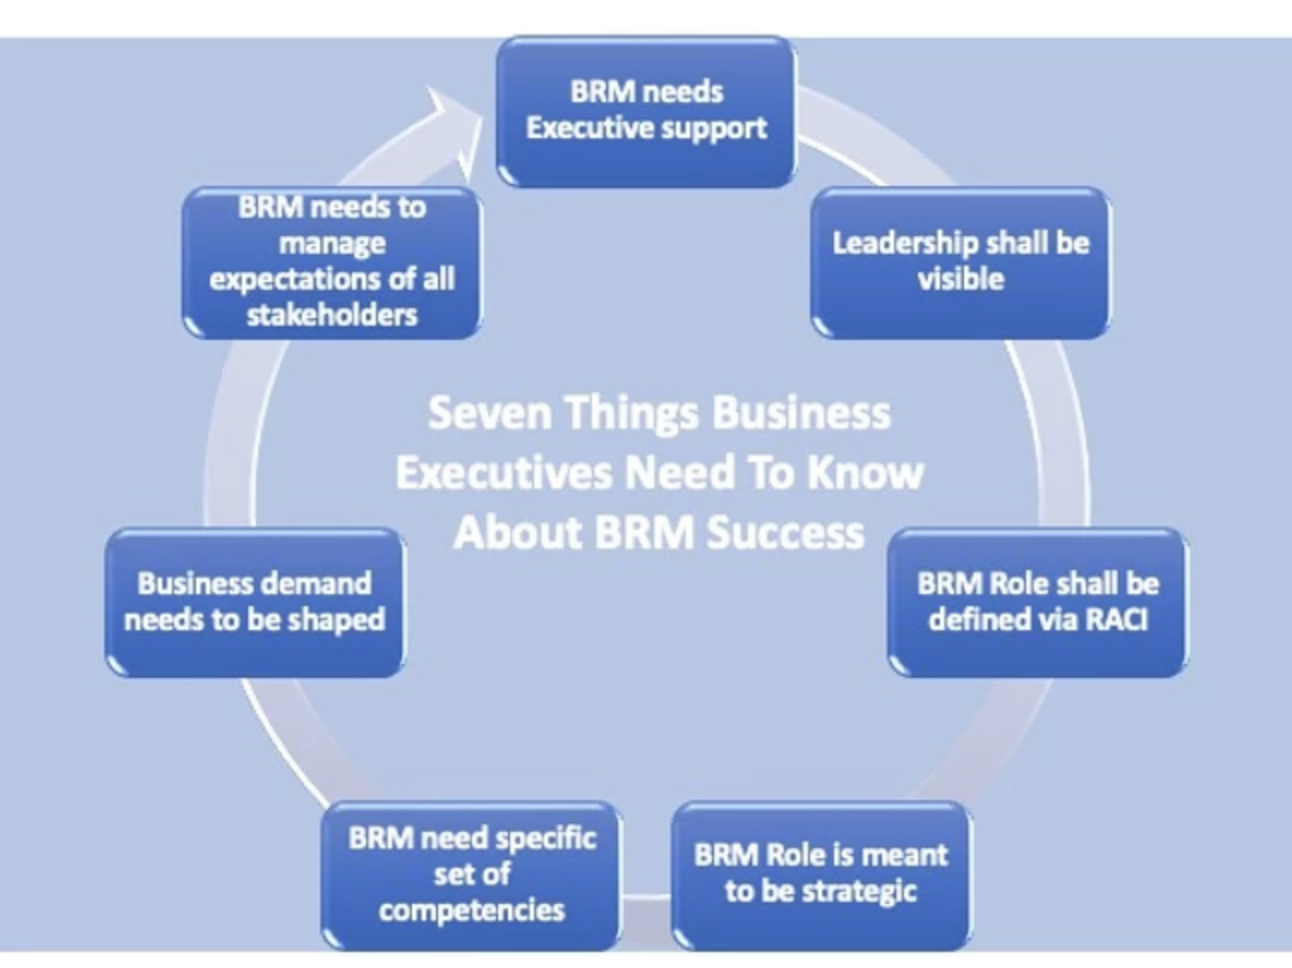 Seven Things Business Executives Need To Know About BRM Success